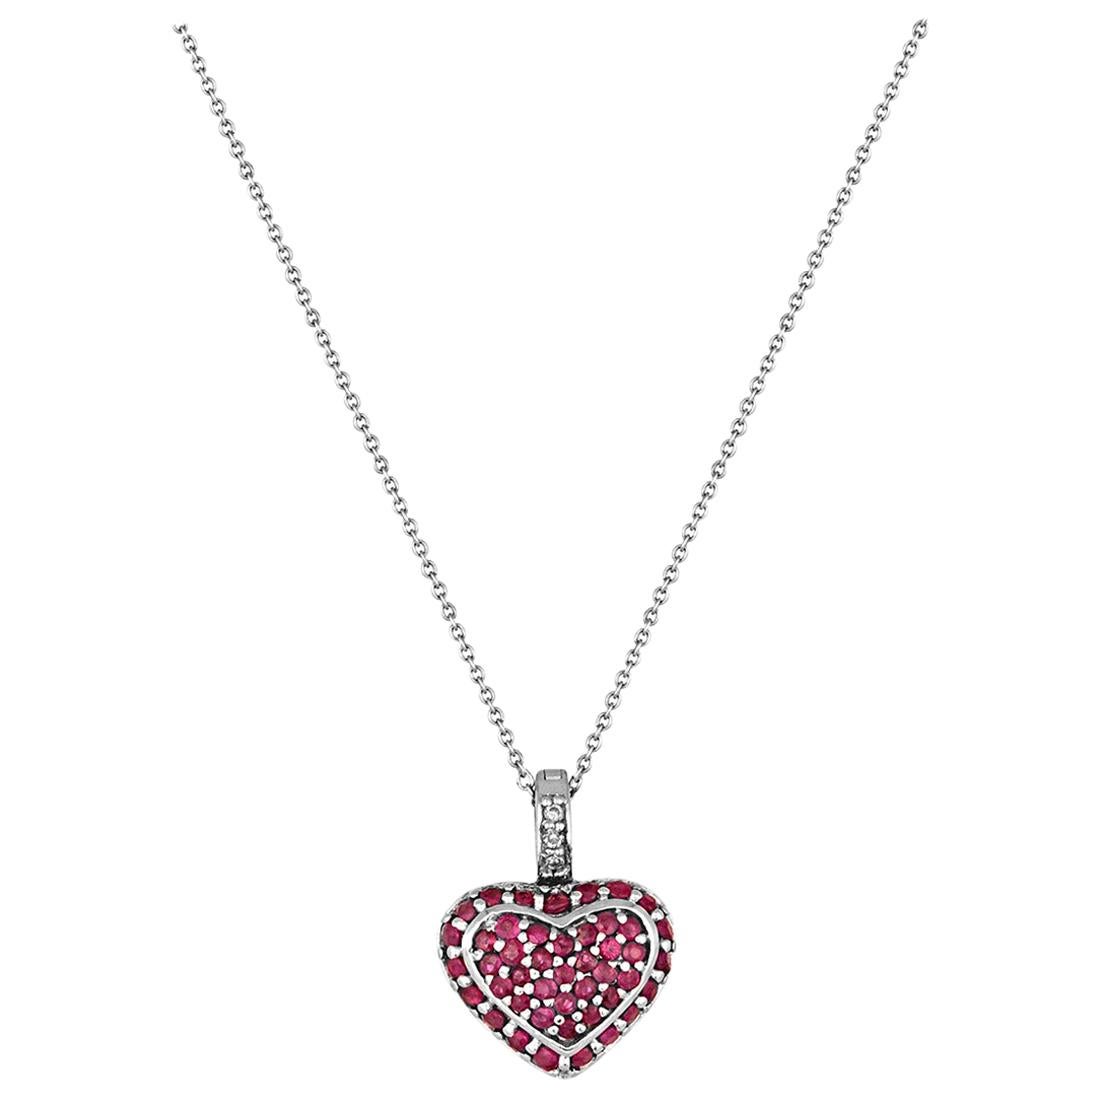 1.25 Carat Ruby and Diamond Gold Heart Pendant Necklace